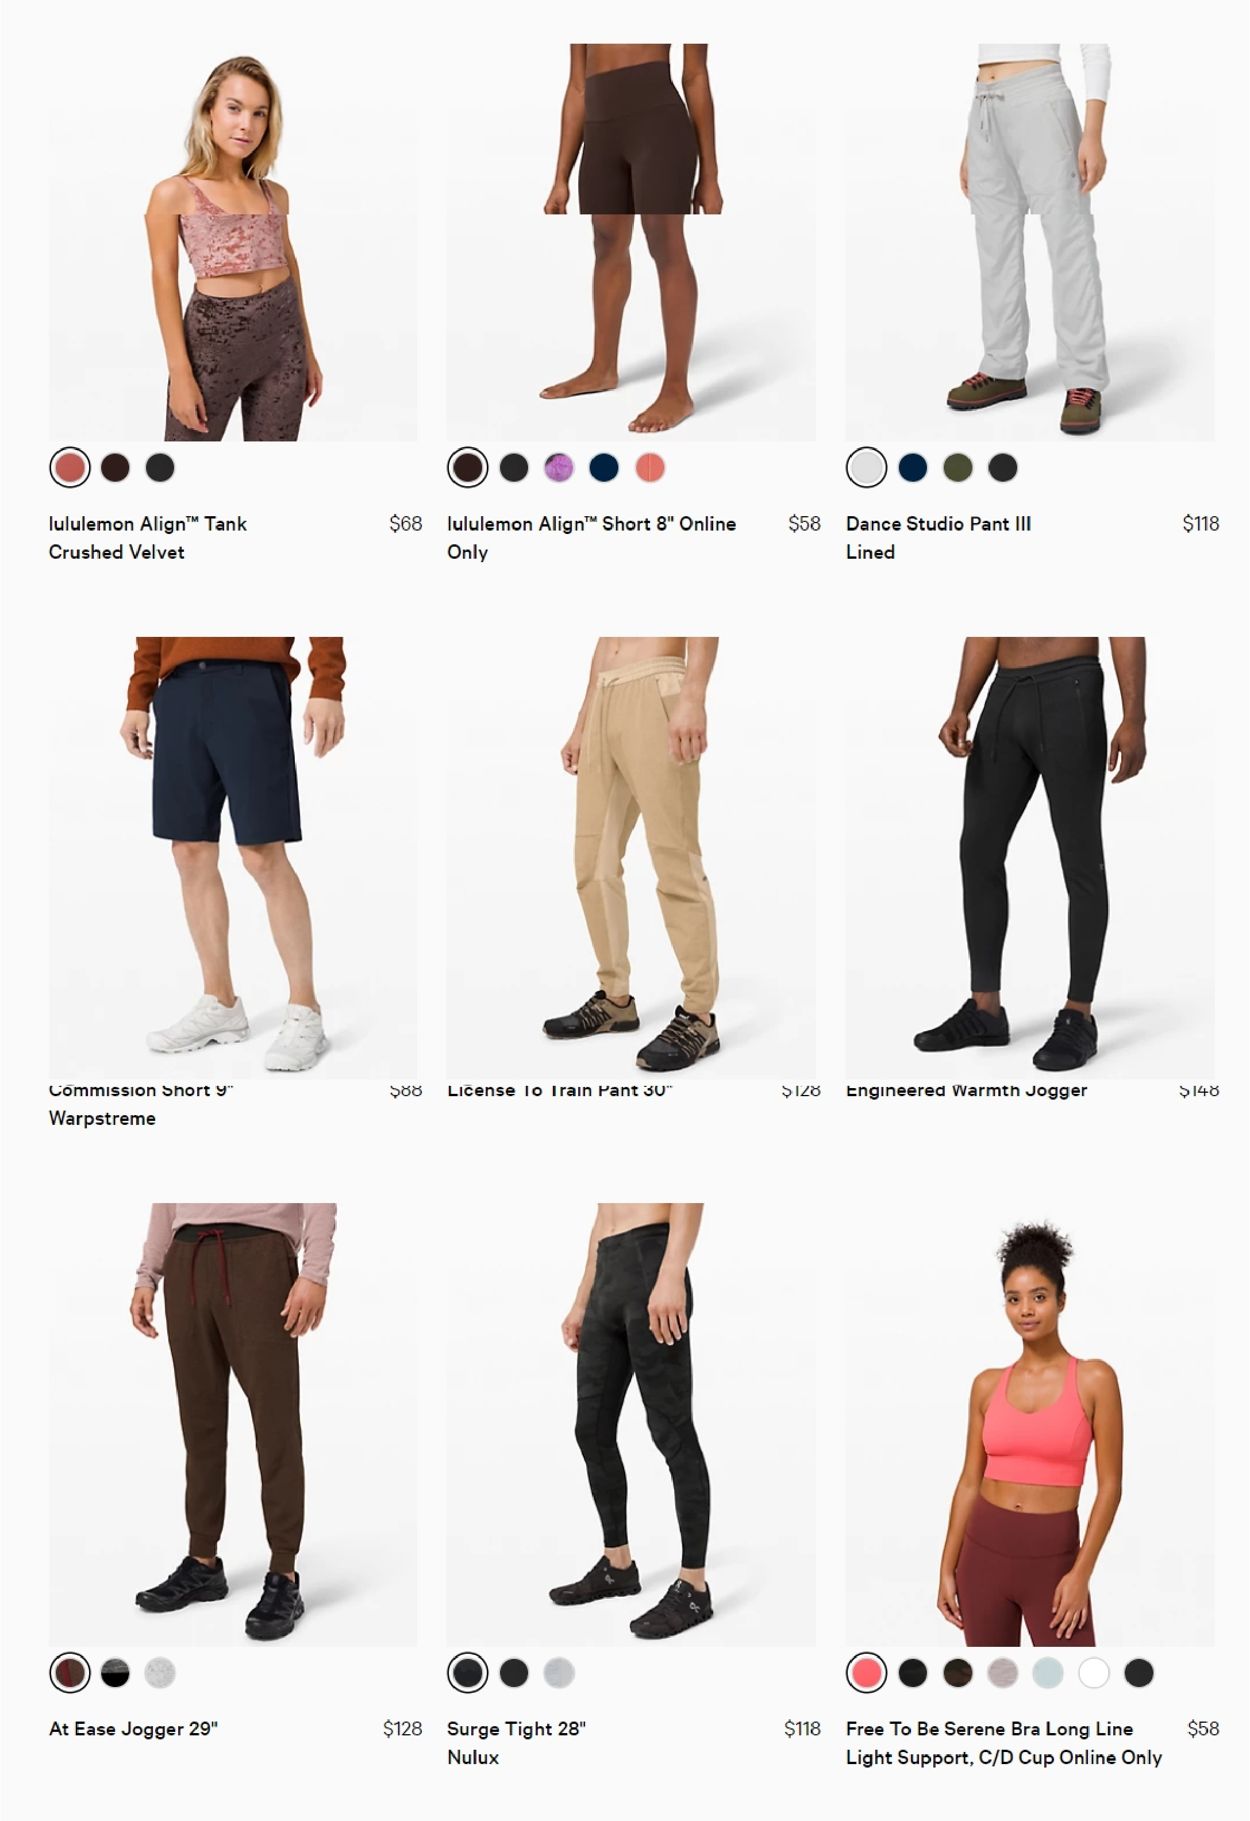 14 Best Lululemon Yoga Pants, Tops, & Accessories for Men and